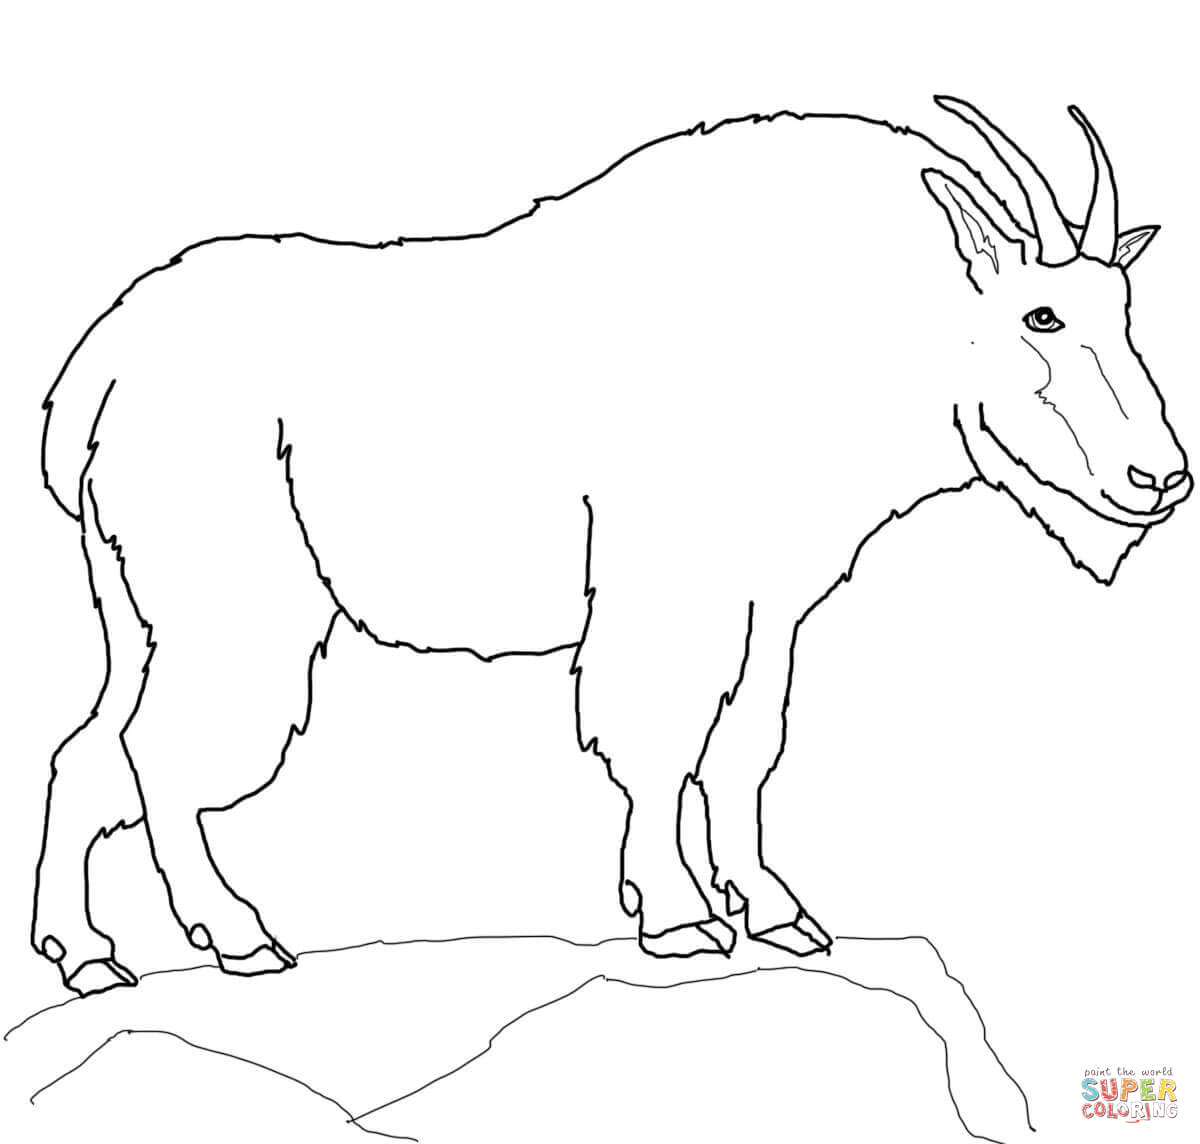 Mountain Goat coloring #15, Download drawings